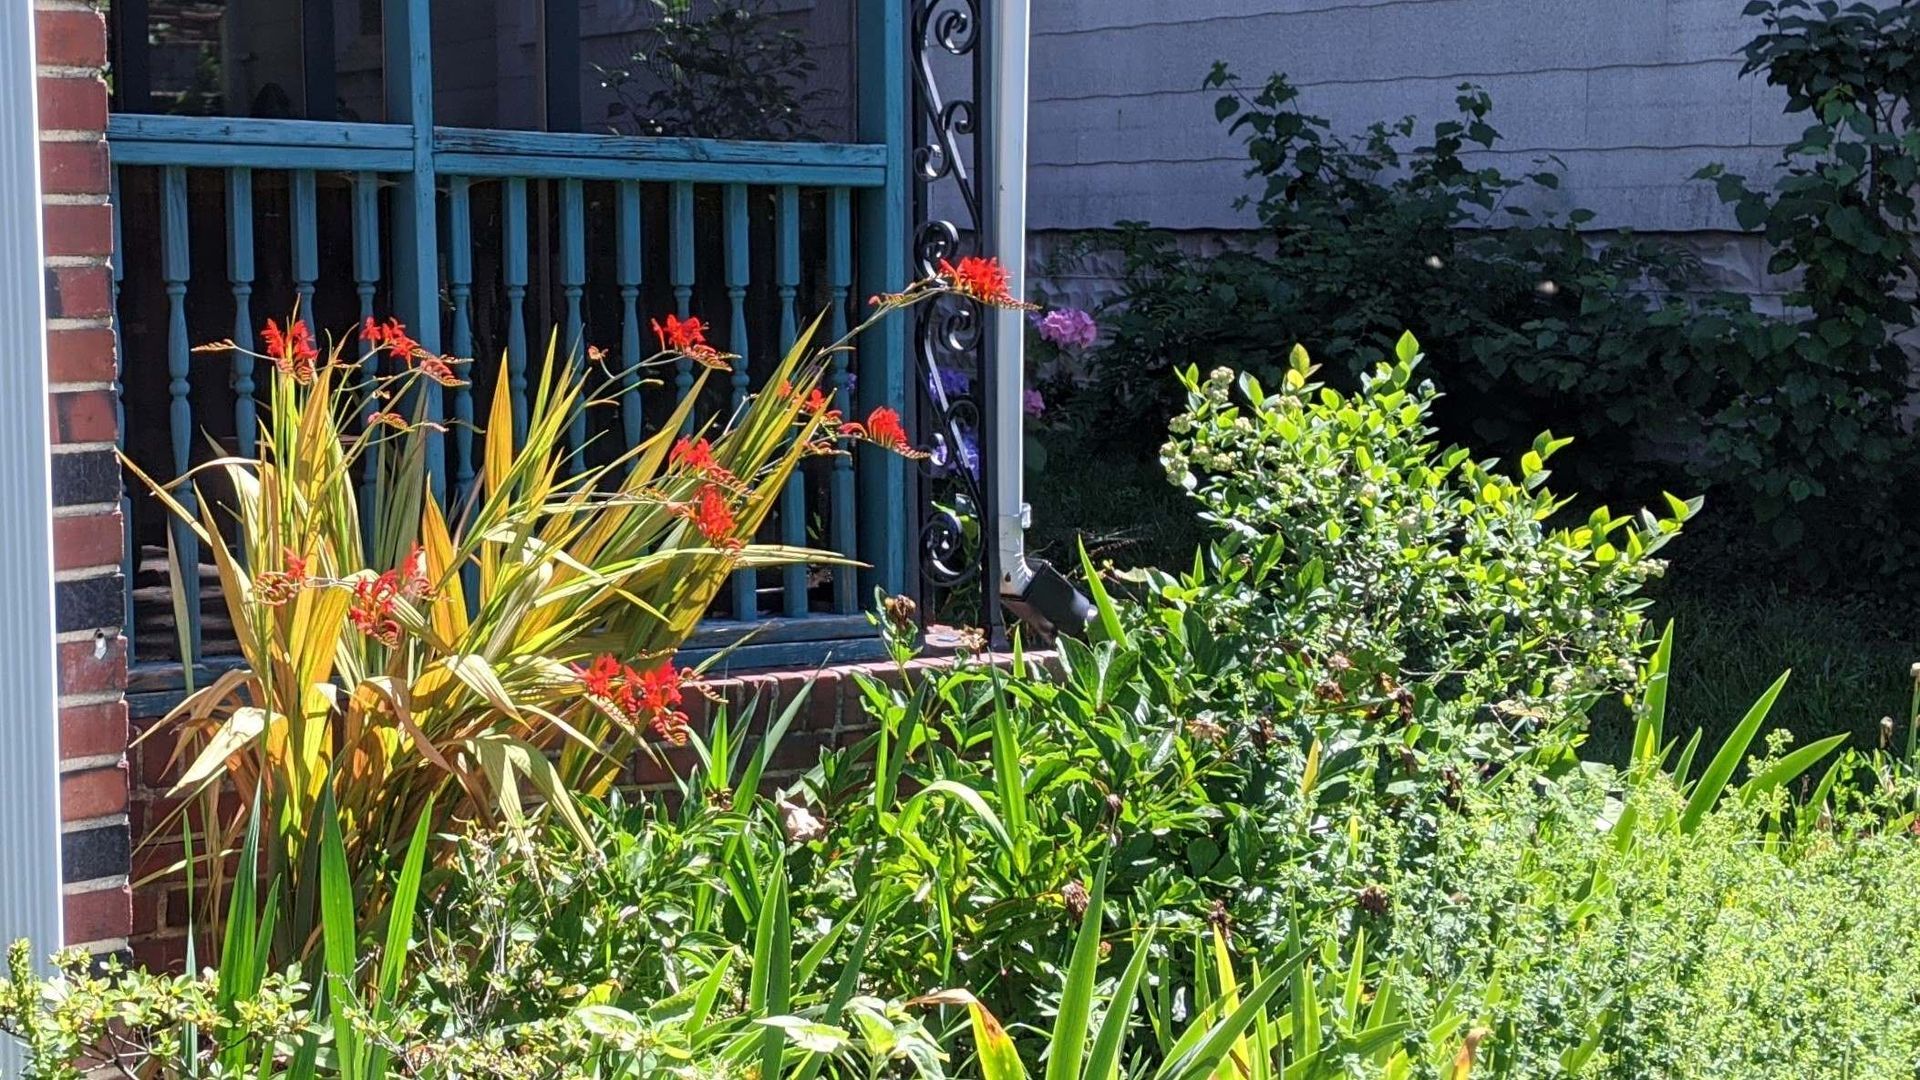 Small garden beside the turquoise railing of a screened porch with tall orange flowers called Lucifer's crocosmia.